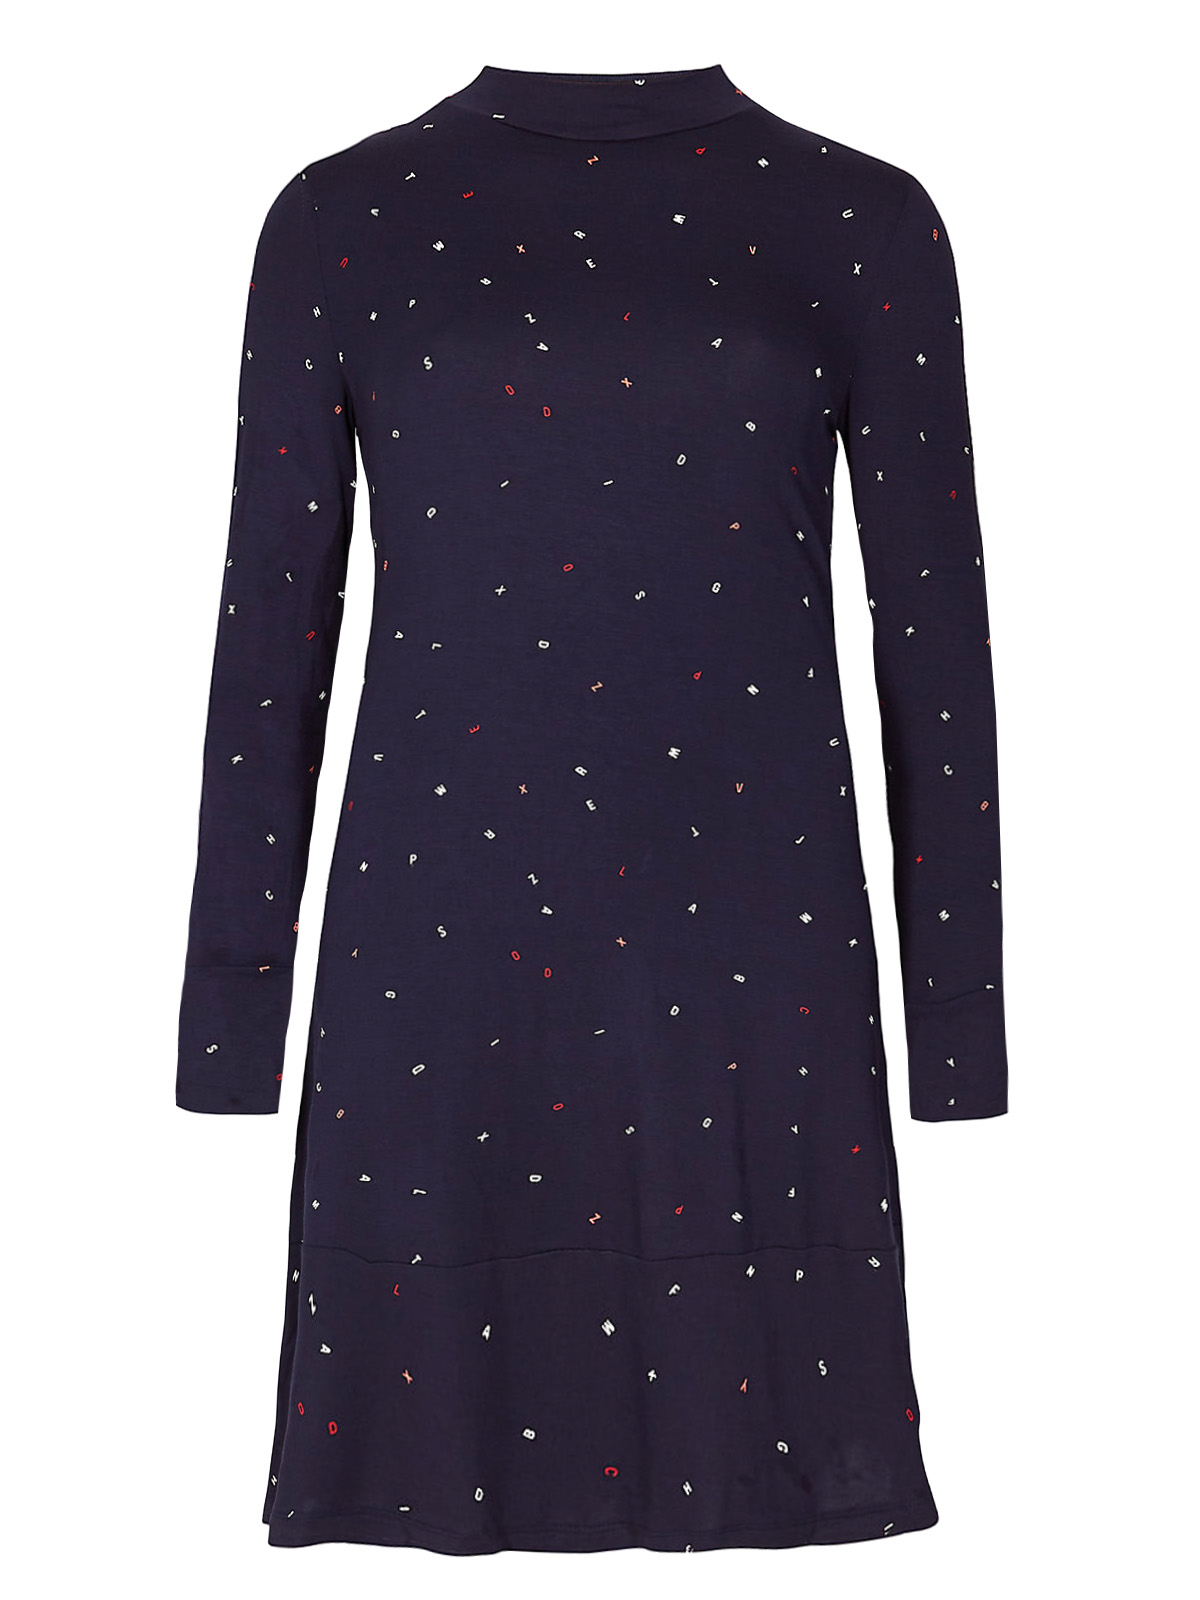 Marks and Spencer - - M&5 NAVY Jersey Letter Print Mini Swing Dress ...